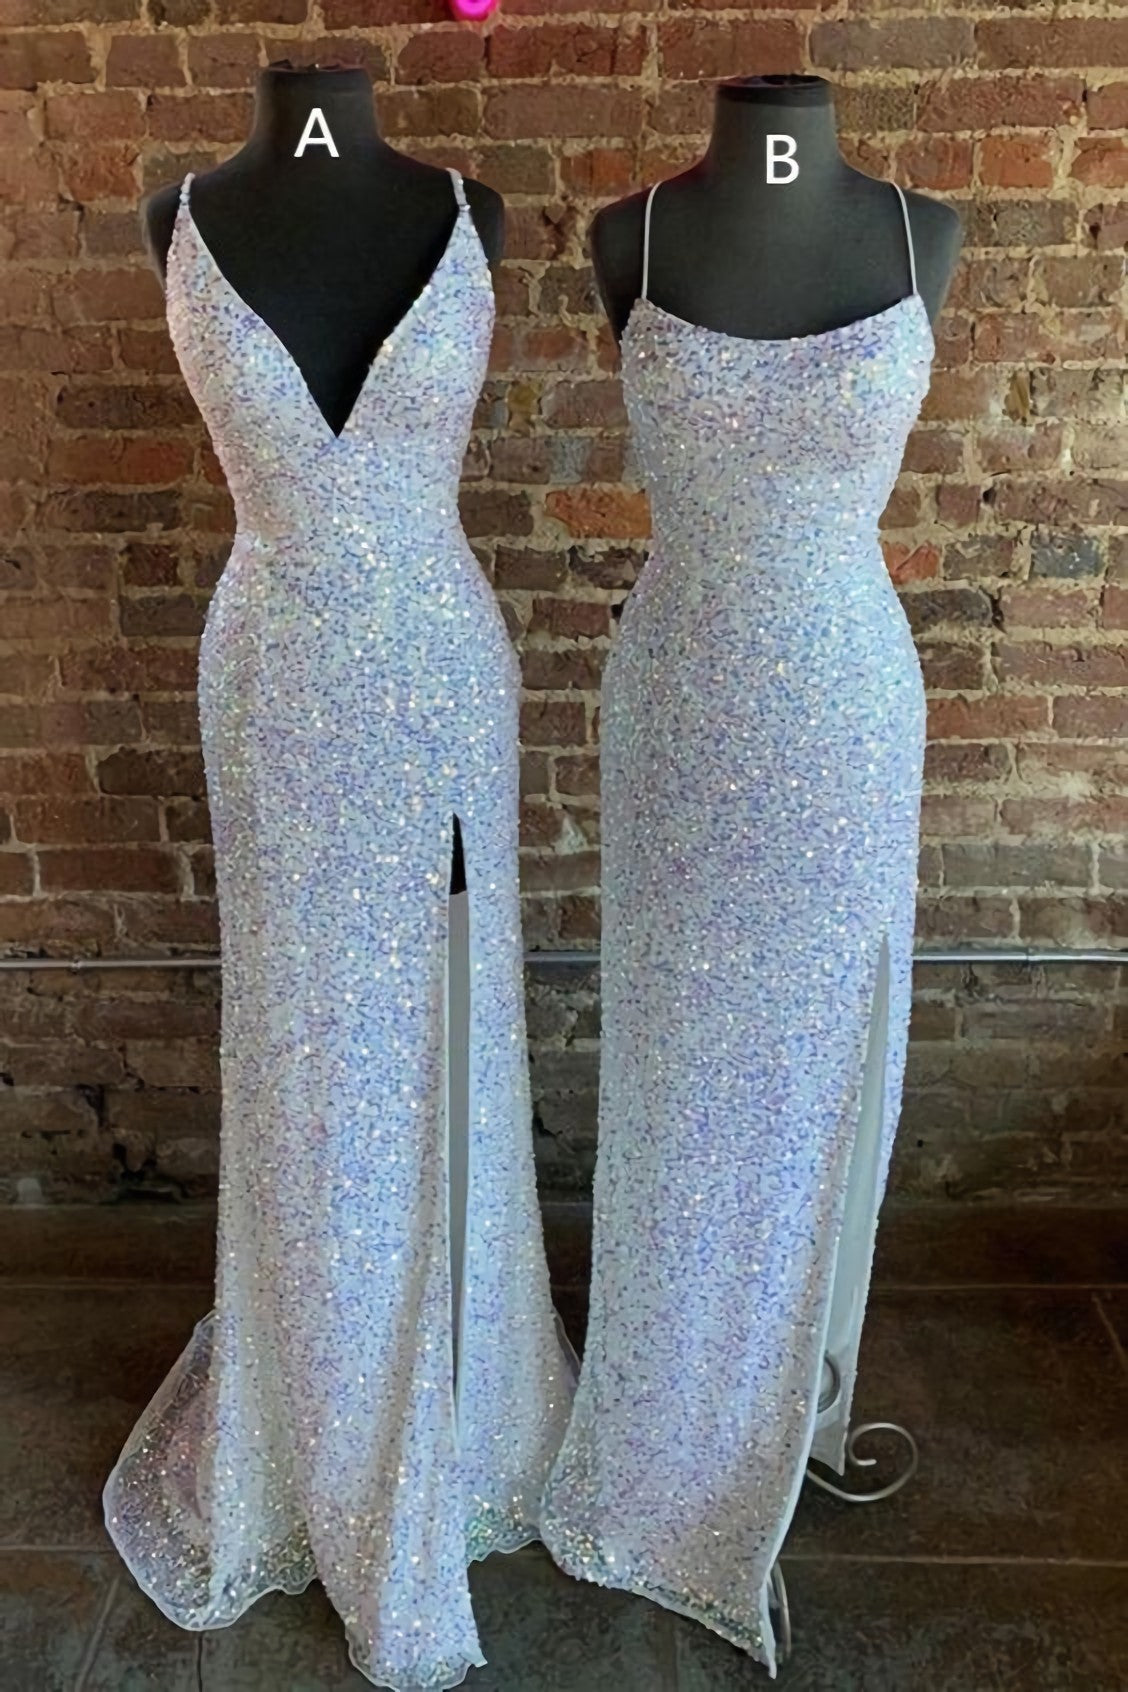 Prom Dresses Mermaide, Gorgeous Mermaid White Sequined Long Prom Dresses, Formal Dresses, With Side Slit